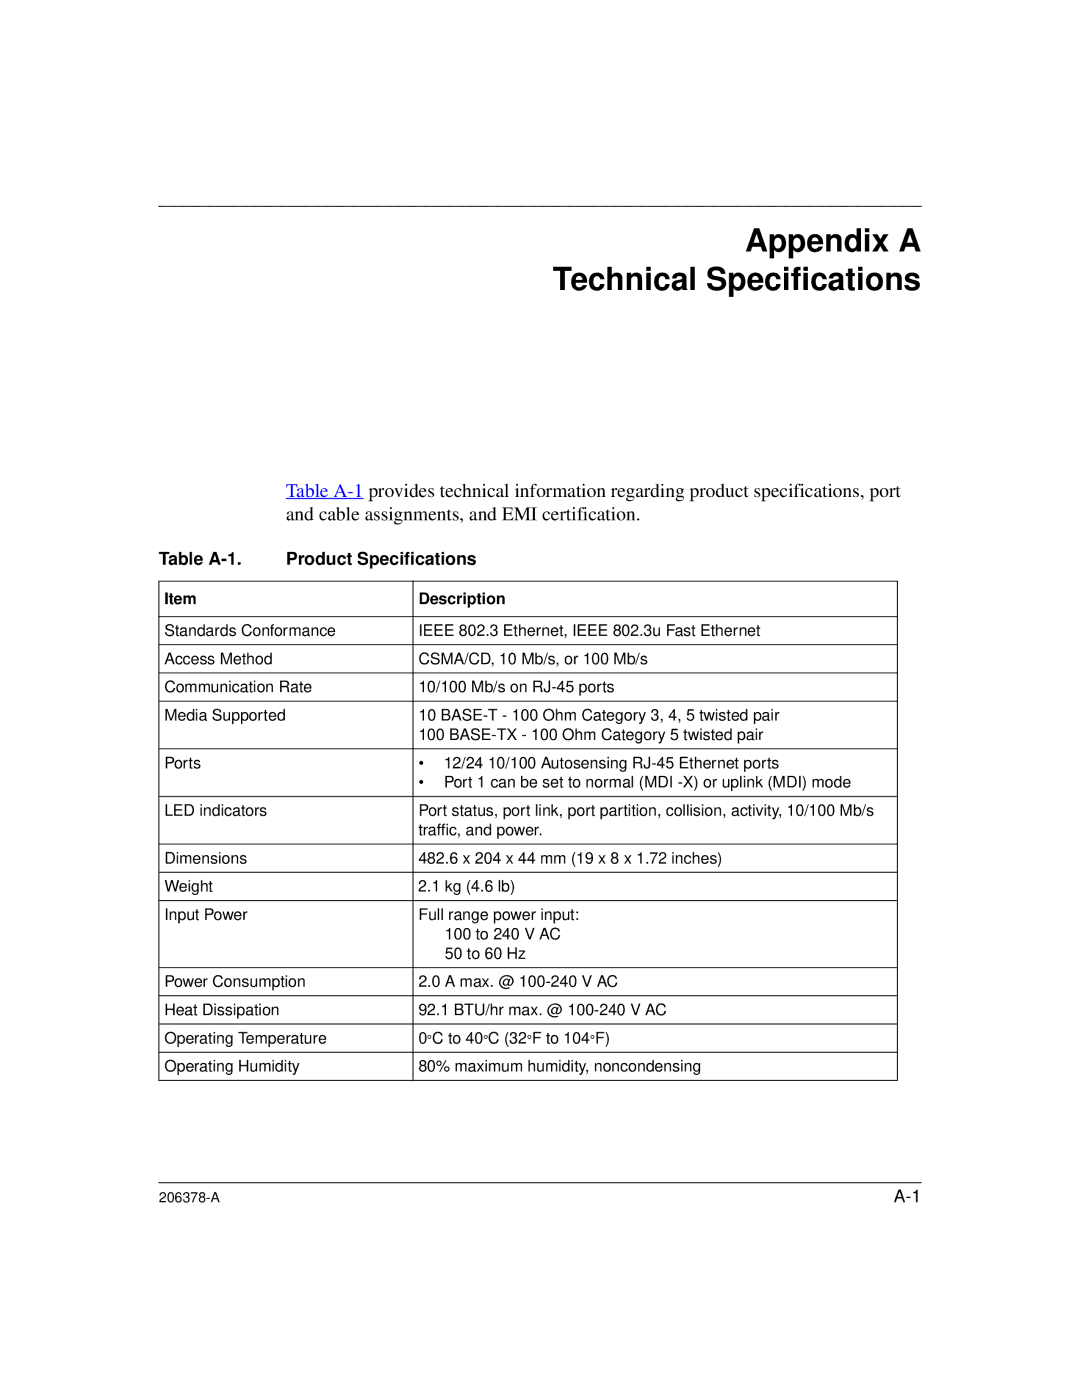 Nortel Networks 60-12T, 60-24T manual Appendix a Technical Specifications, Table A-1 Product Specifications, Description 